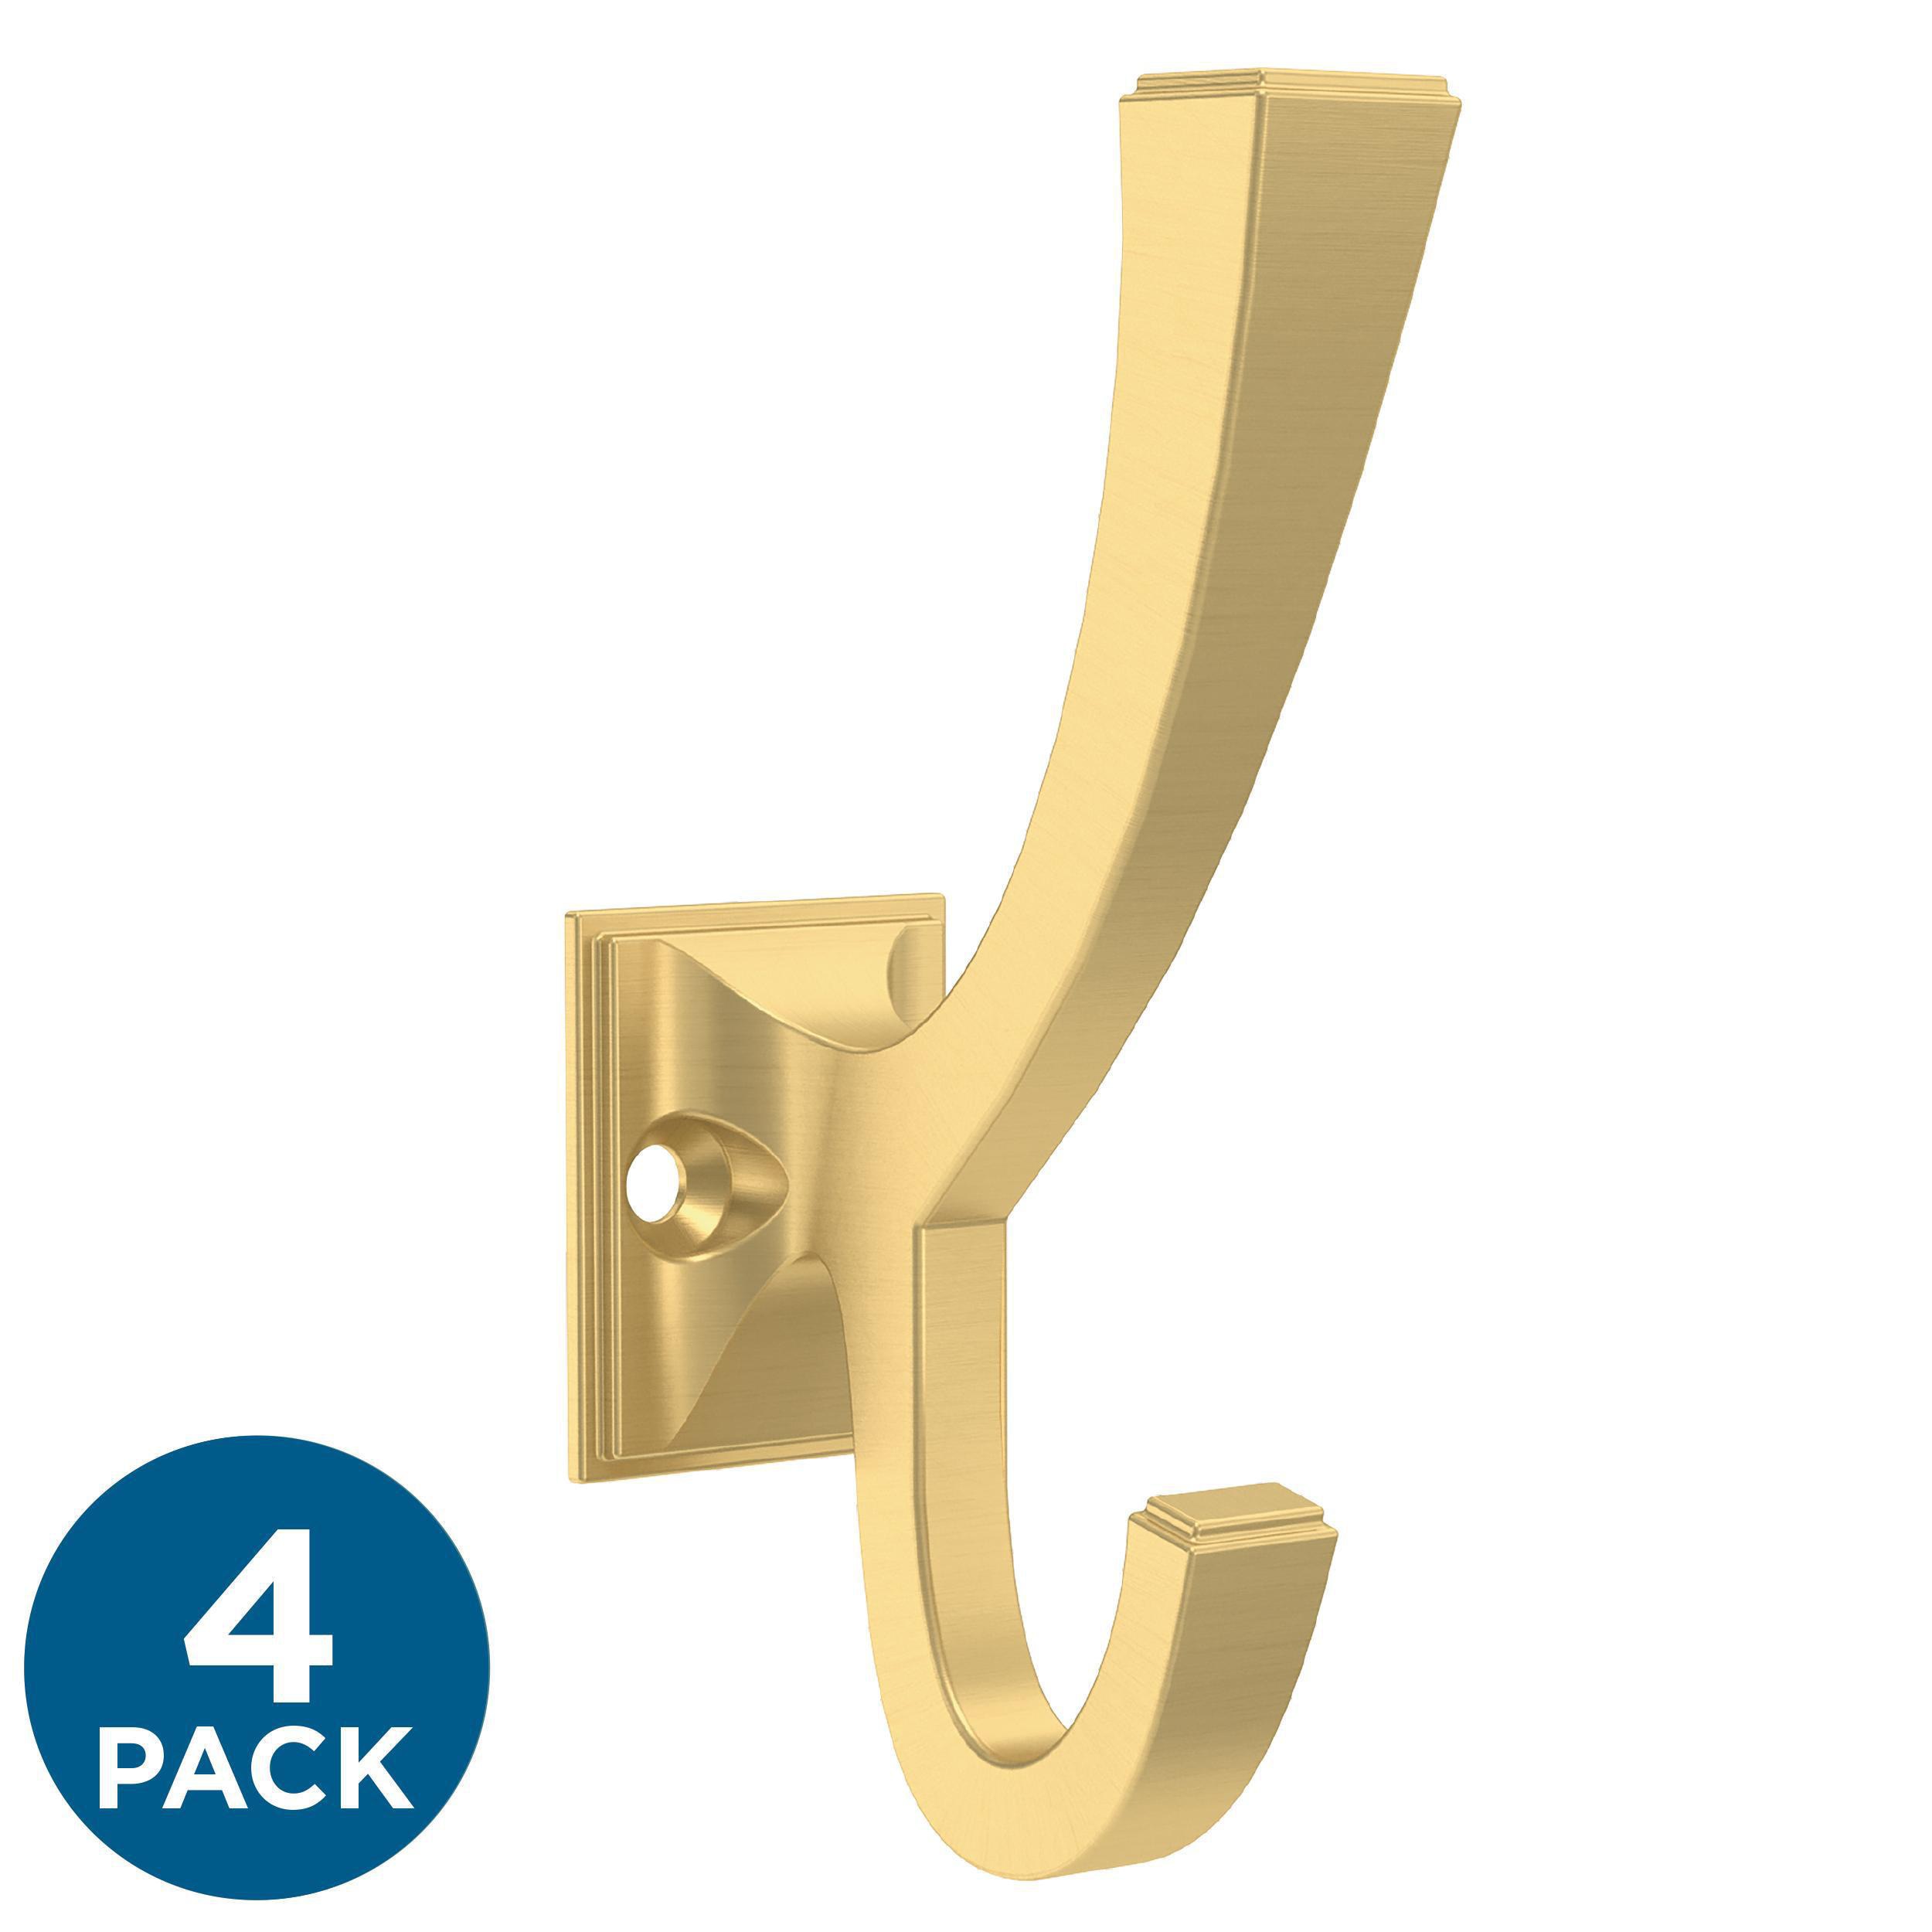 Outlet Franklin Brass FBHDCH4-511-R, 16 Hook Rail / Rack, with 4